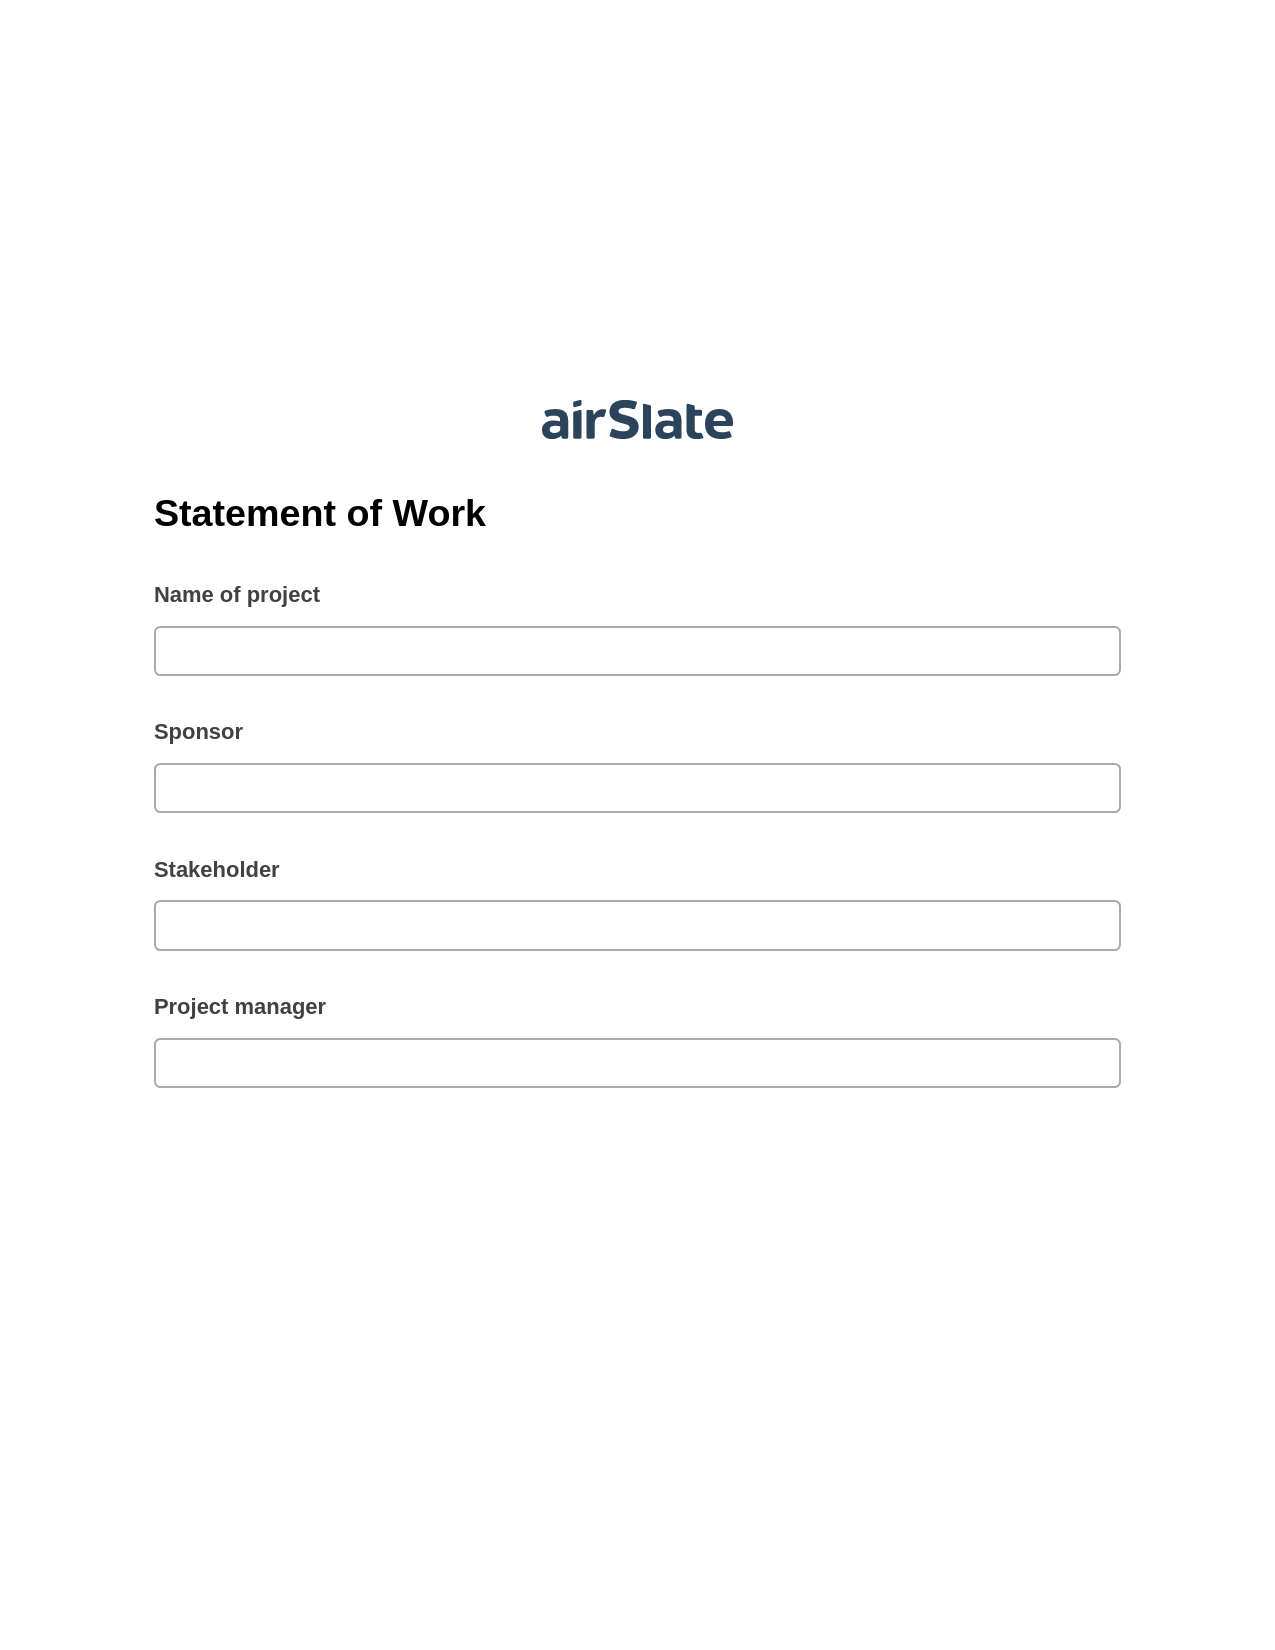 Statement of Work Pre-fill from Salesforce Record Bot, Roles Reminder Bot, Export to Google Sheet Bot